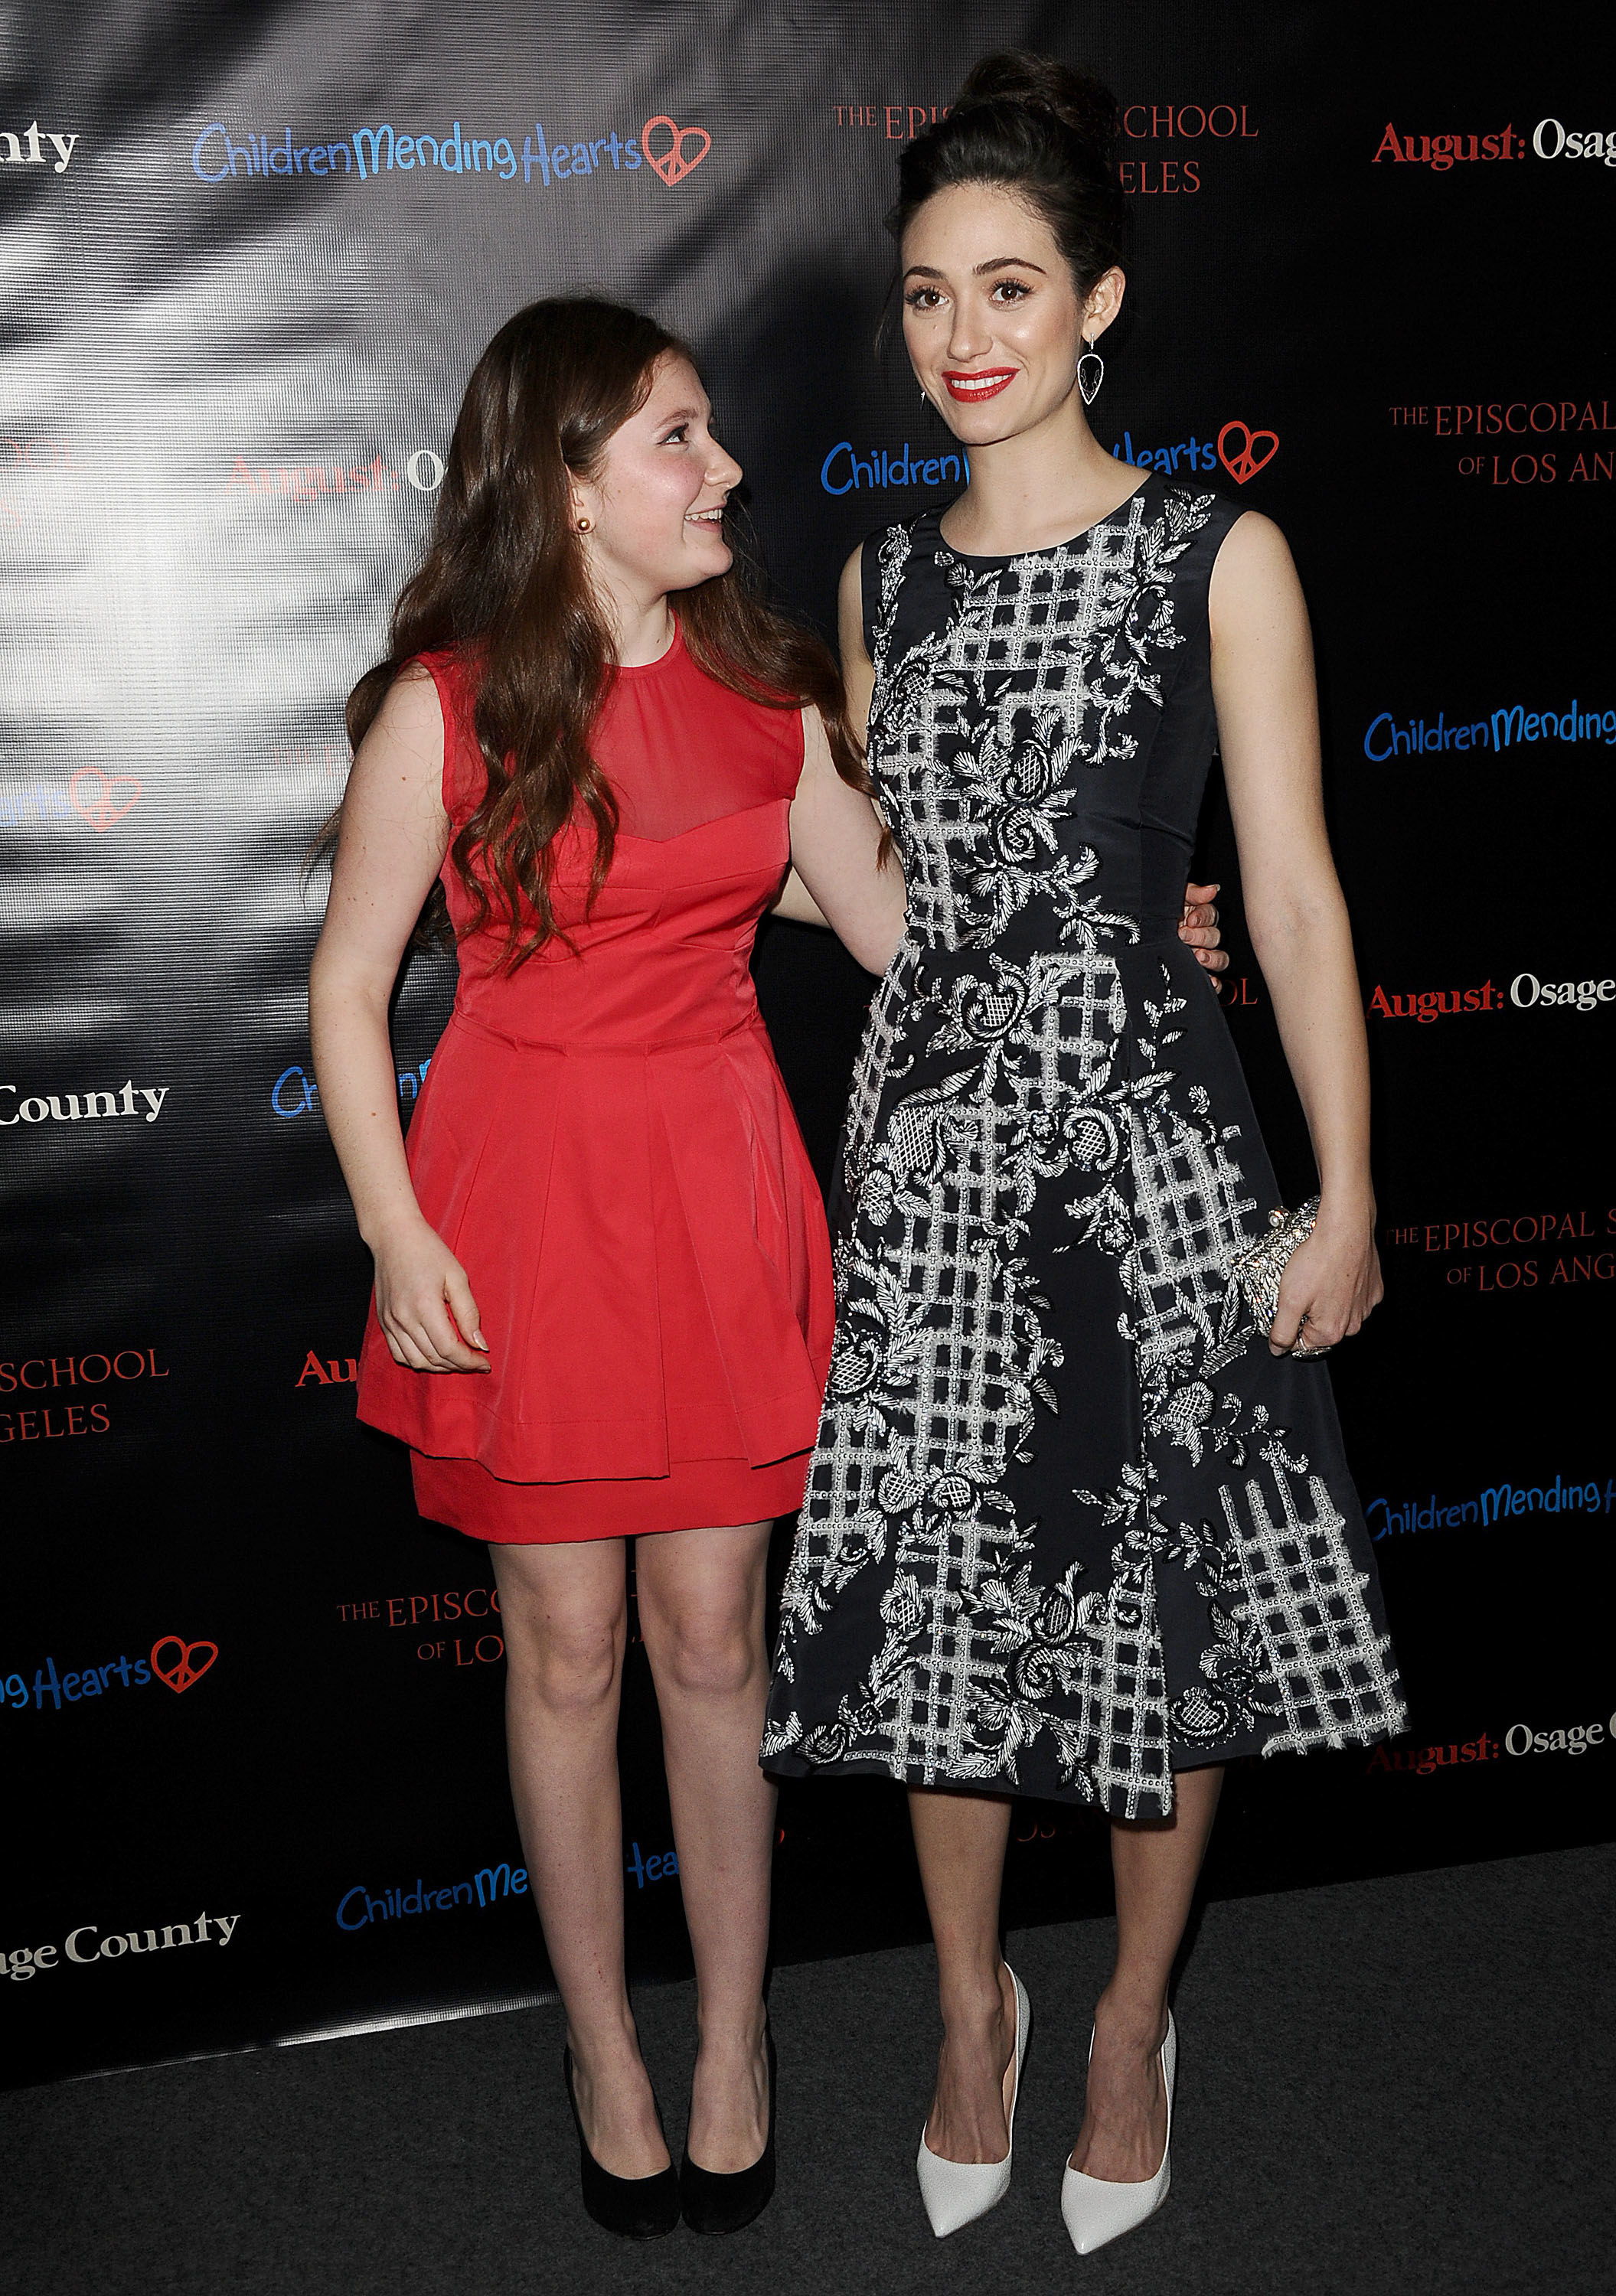 Emma Kenney and Emmy Rossum in dresses at an event